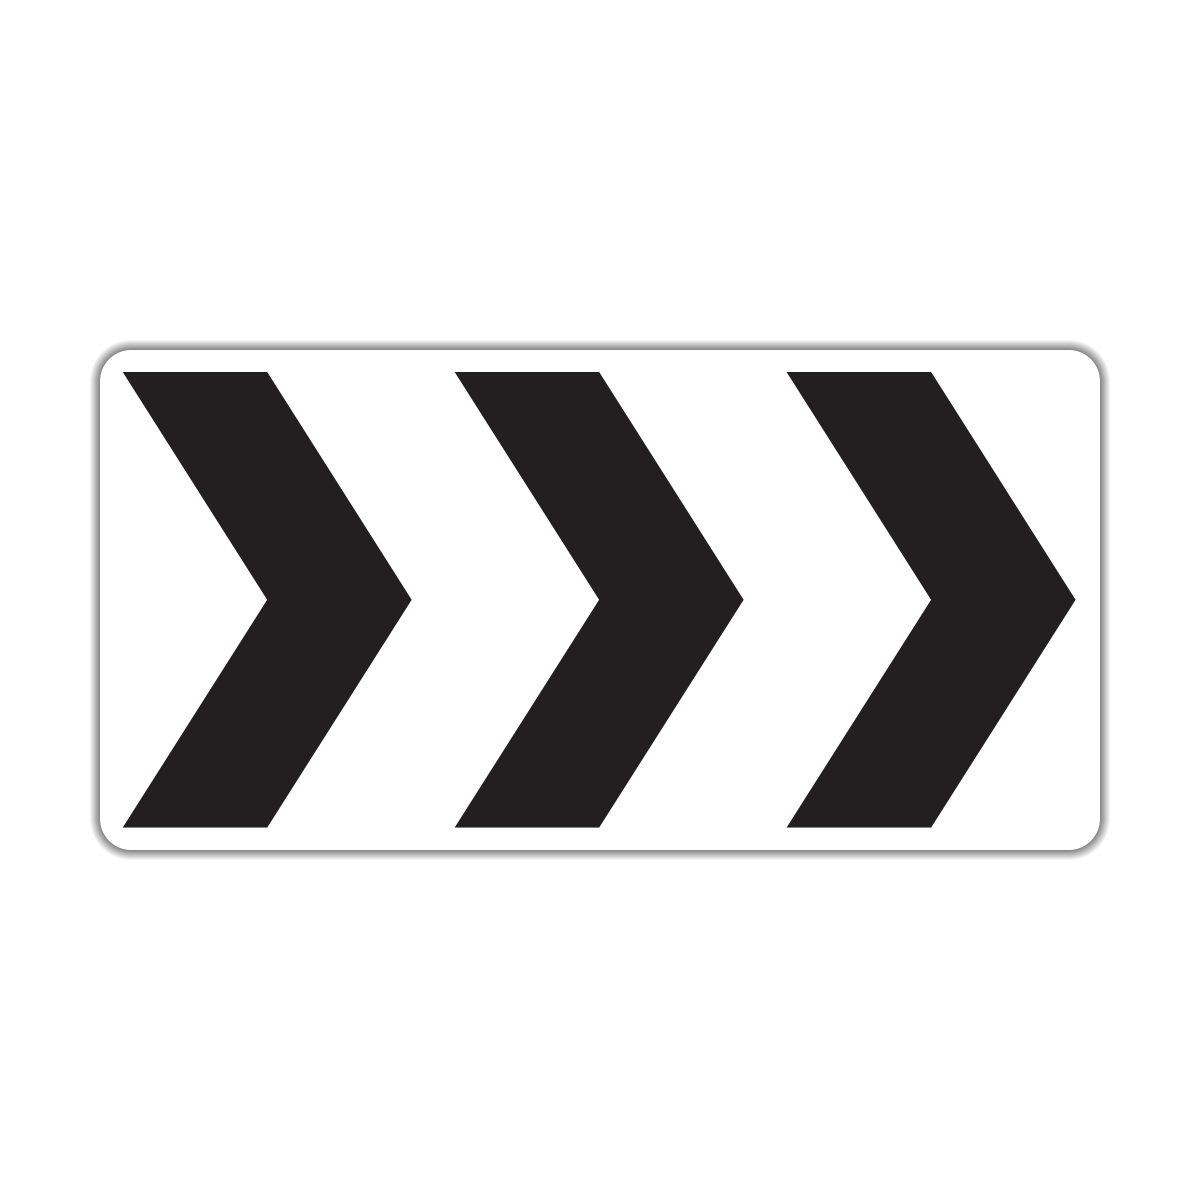 R6-4a Roundabout Directional (3 Chevrons)